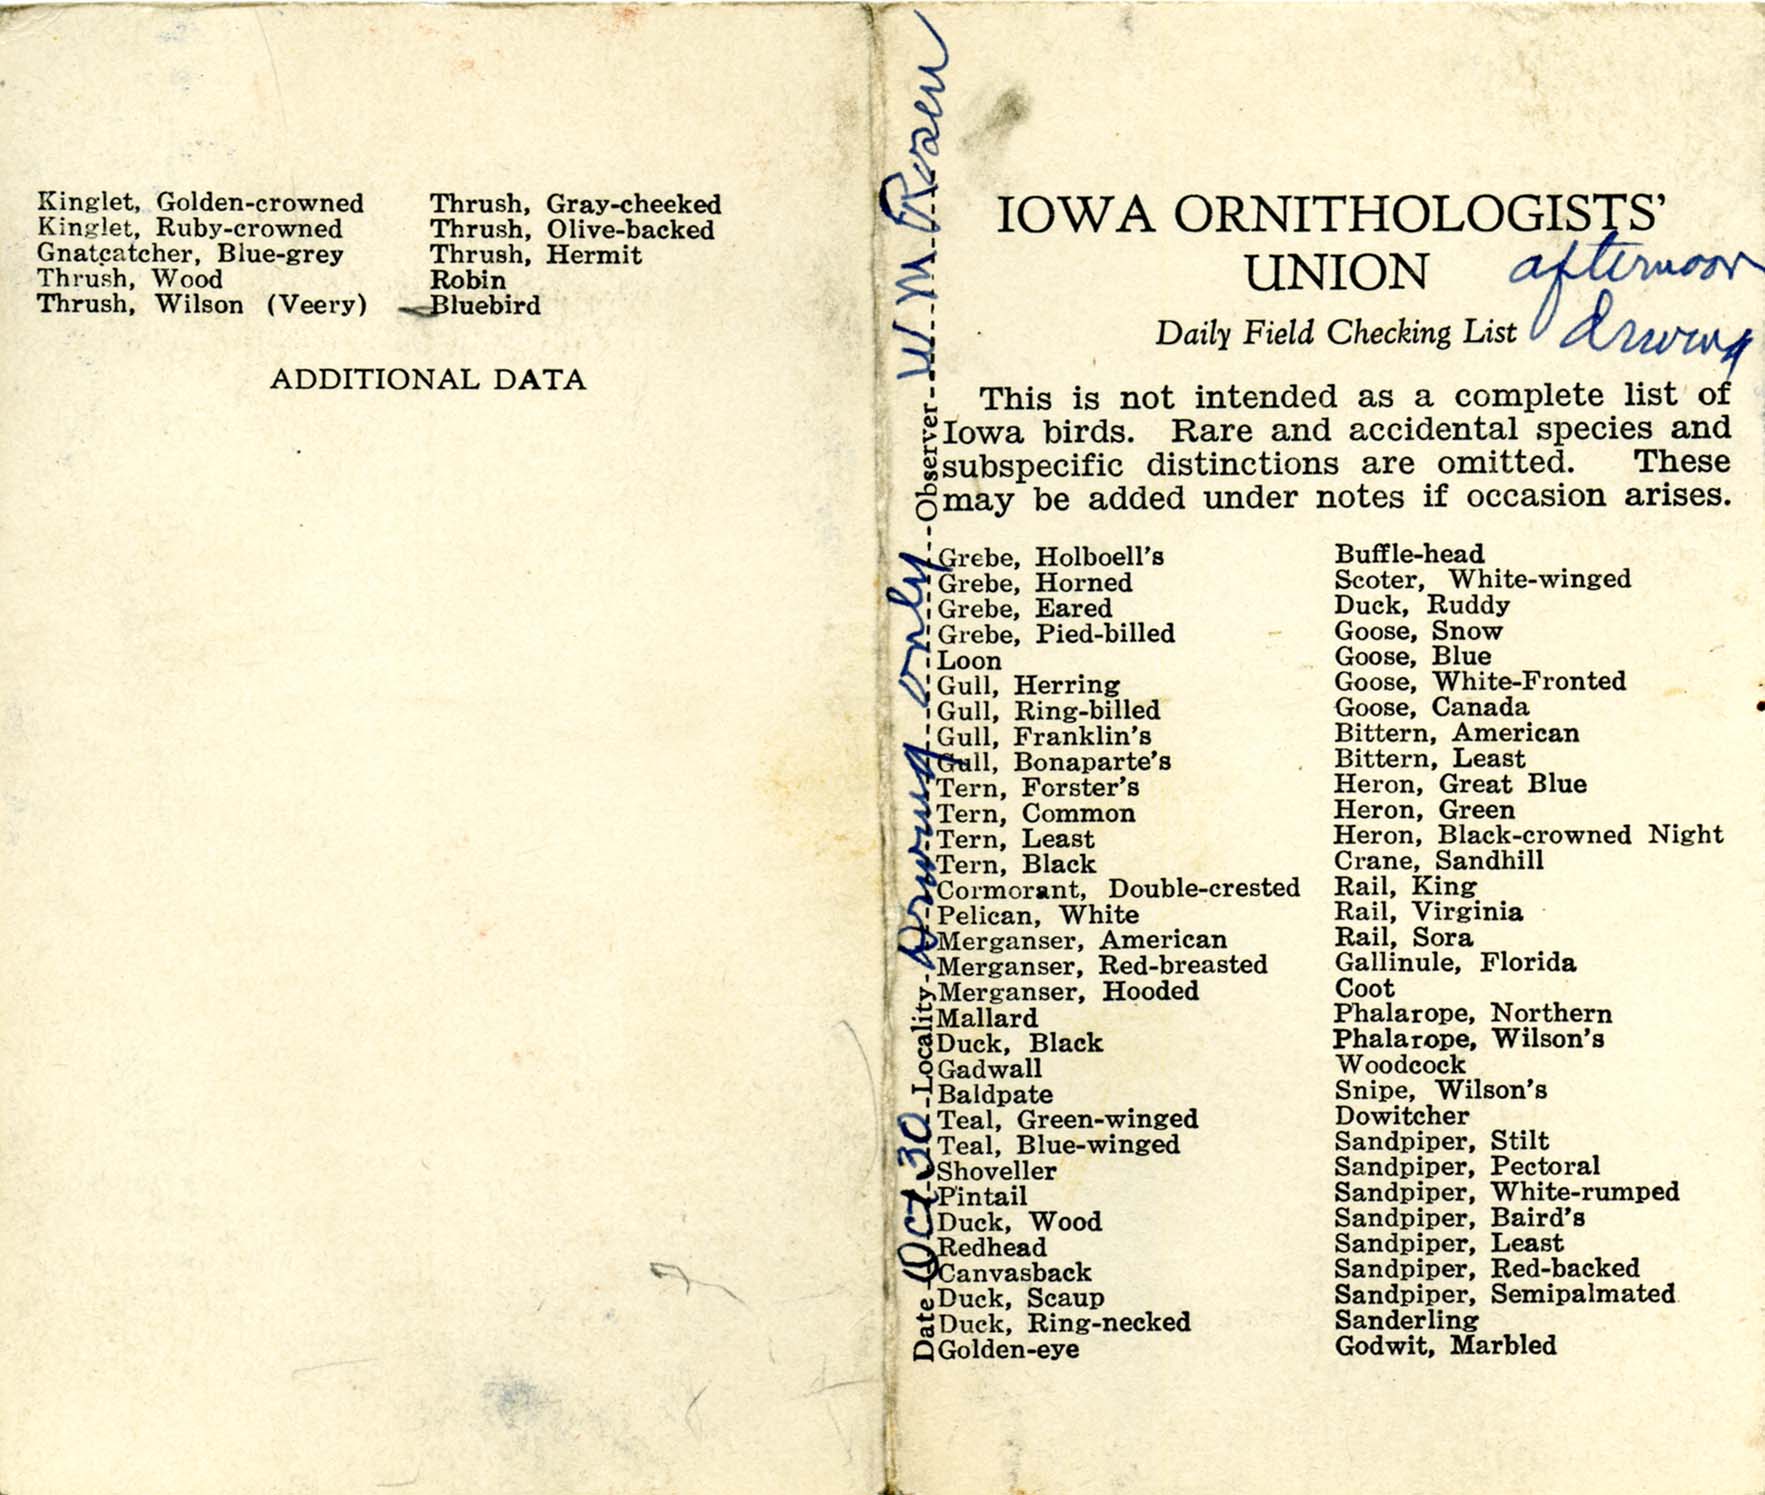 Daily field checking list by Walter Rosene, October 30, 1938